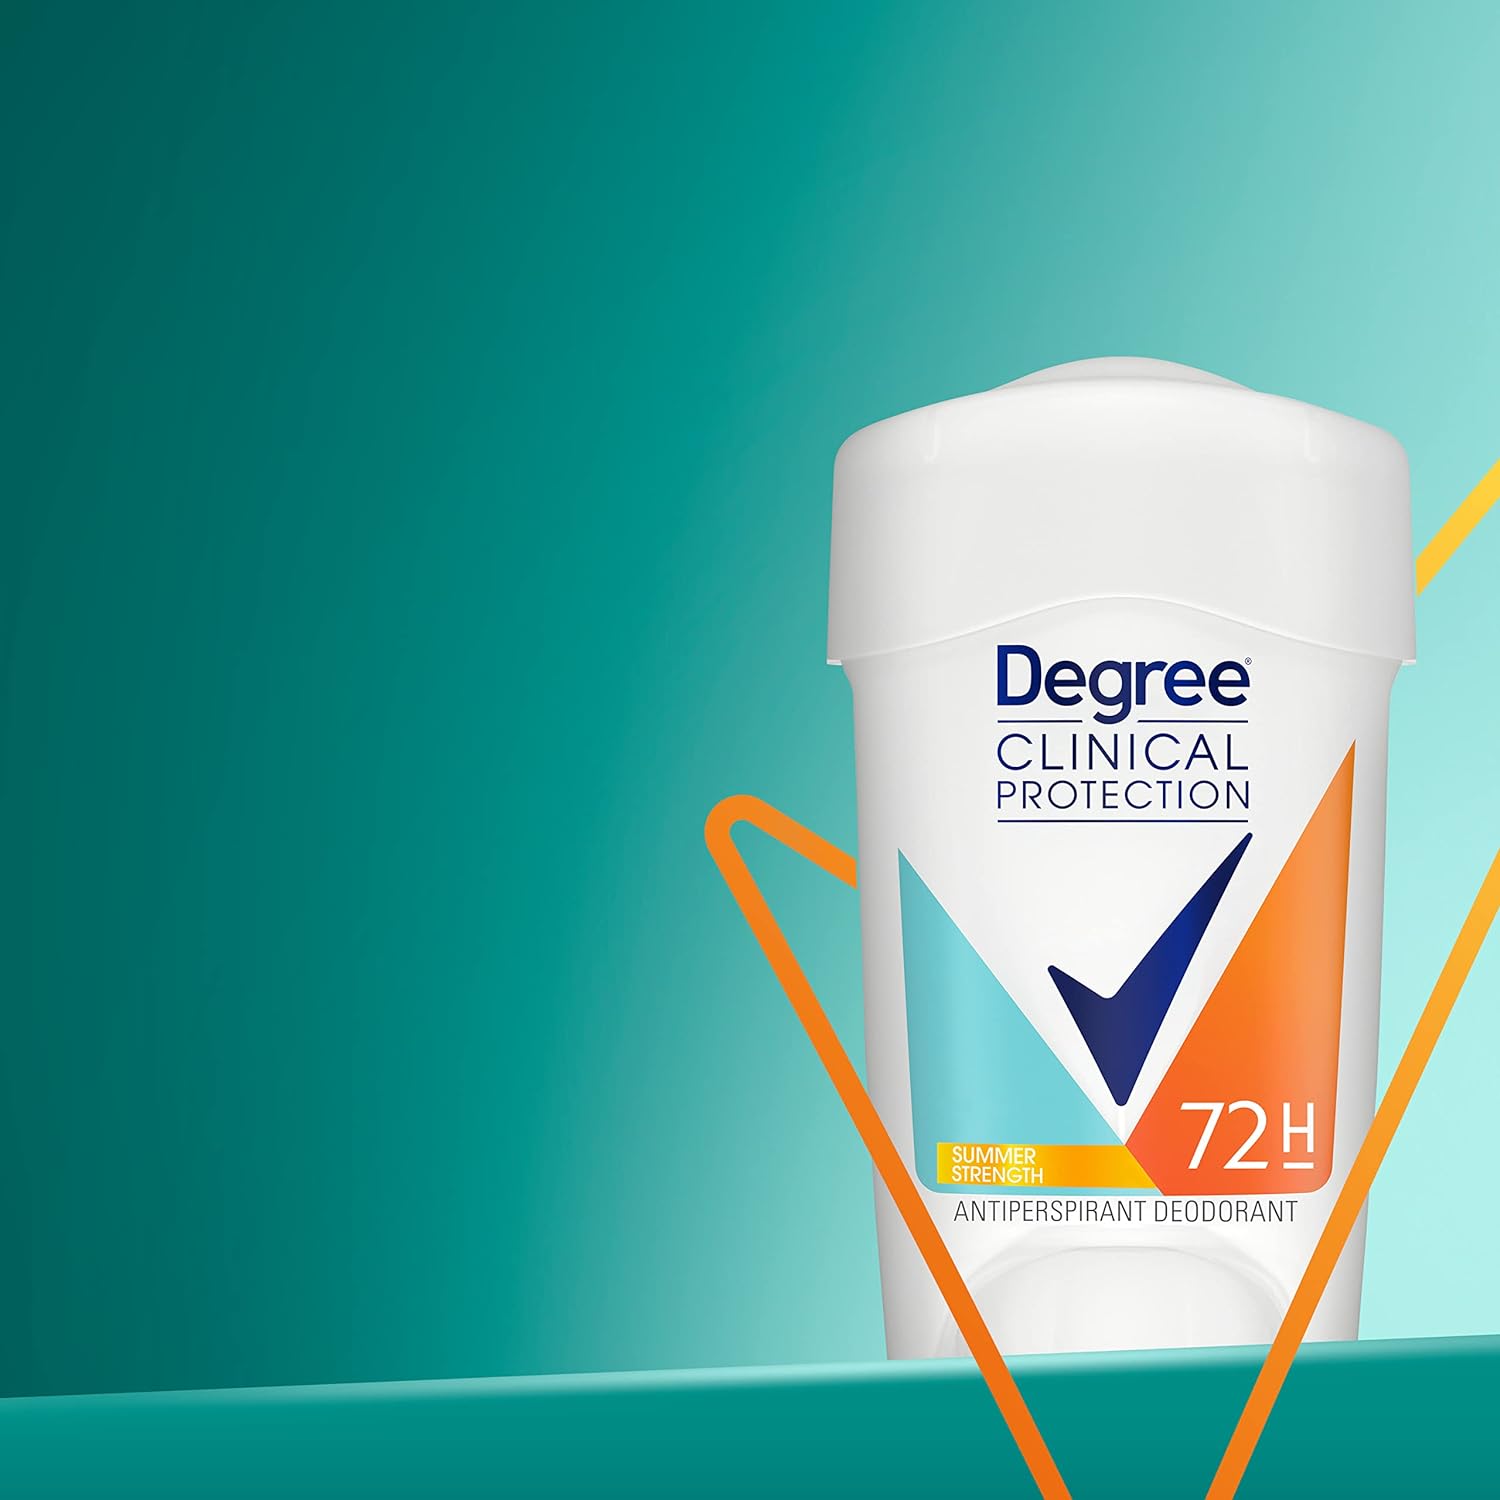 Degree Clinical Protection Antiperspirant Deodorant 72-Hour Sweat & Odor Protection Summer Strength Antiperspirant for Women 1.7 oz : Degree Clinical Protection For Women : Beauty & Personal Care